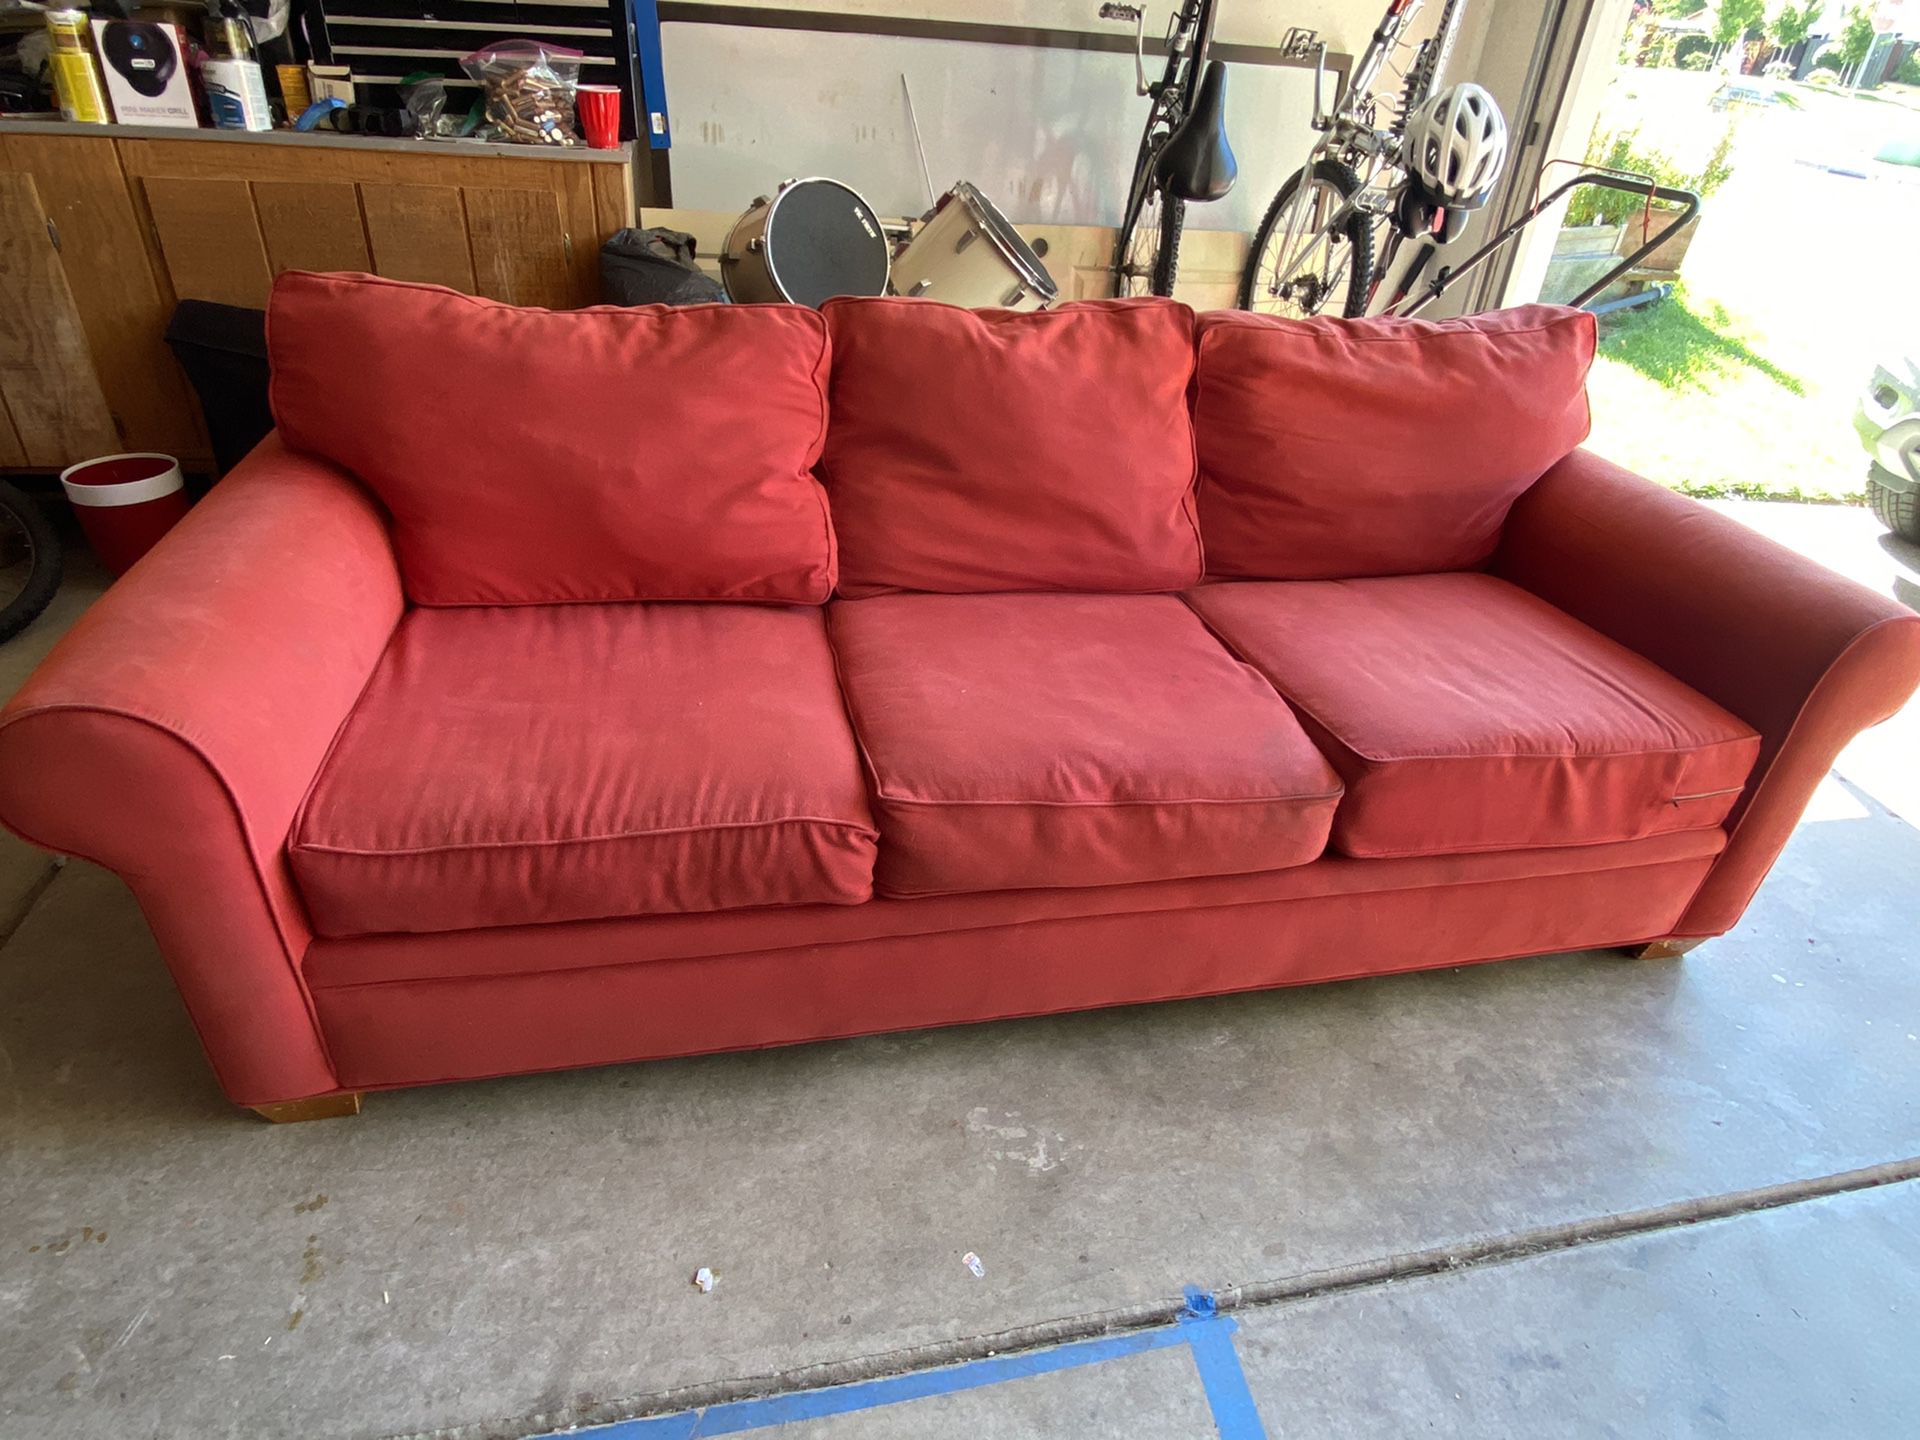 FREE Matching couch, chair and ottoman